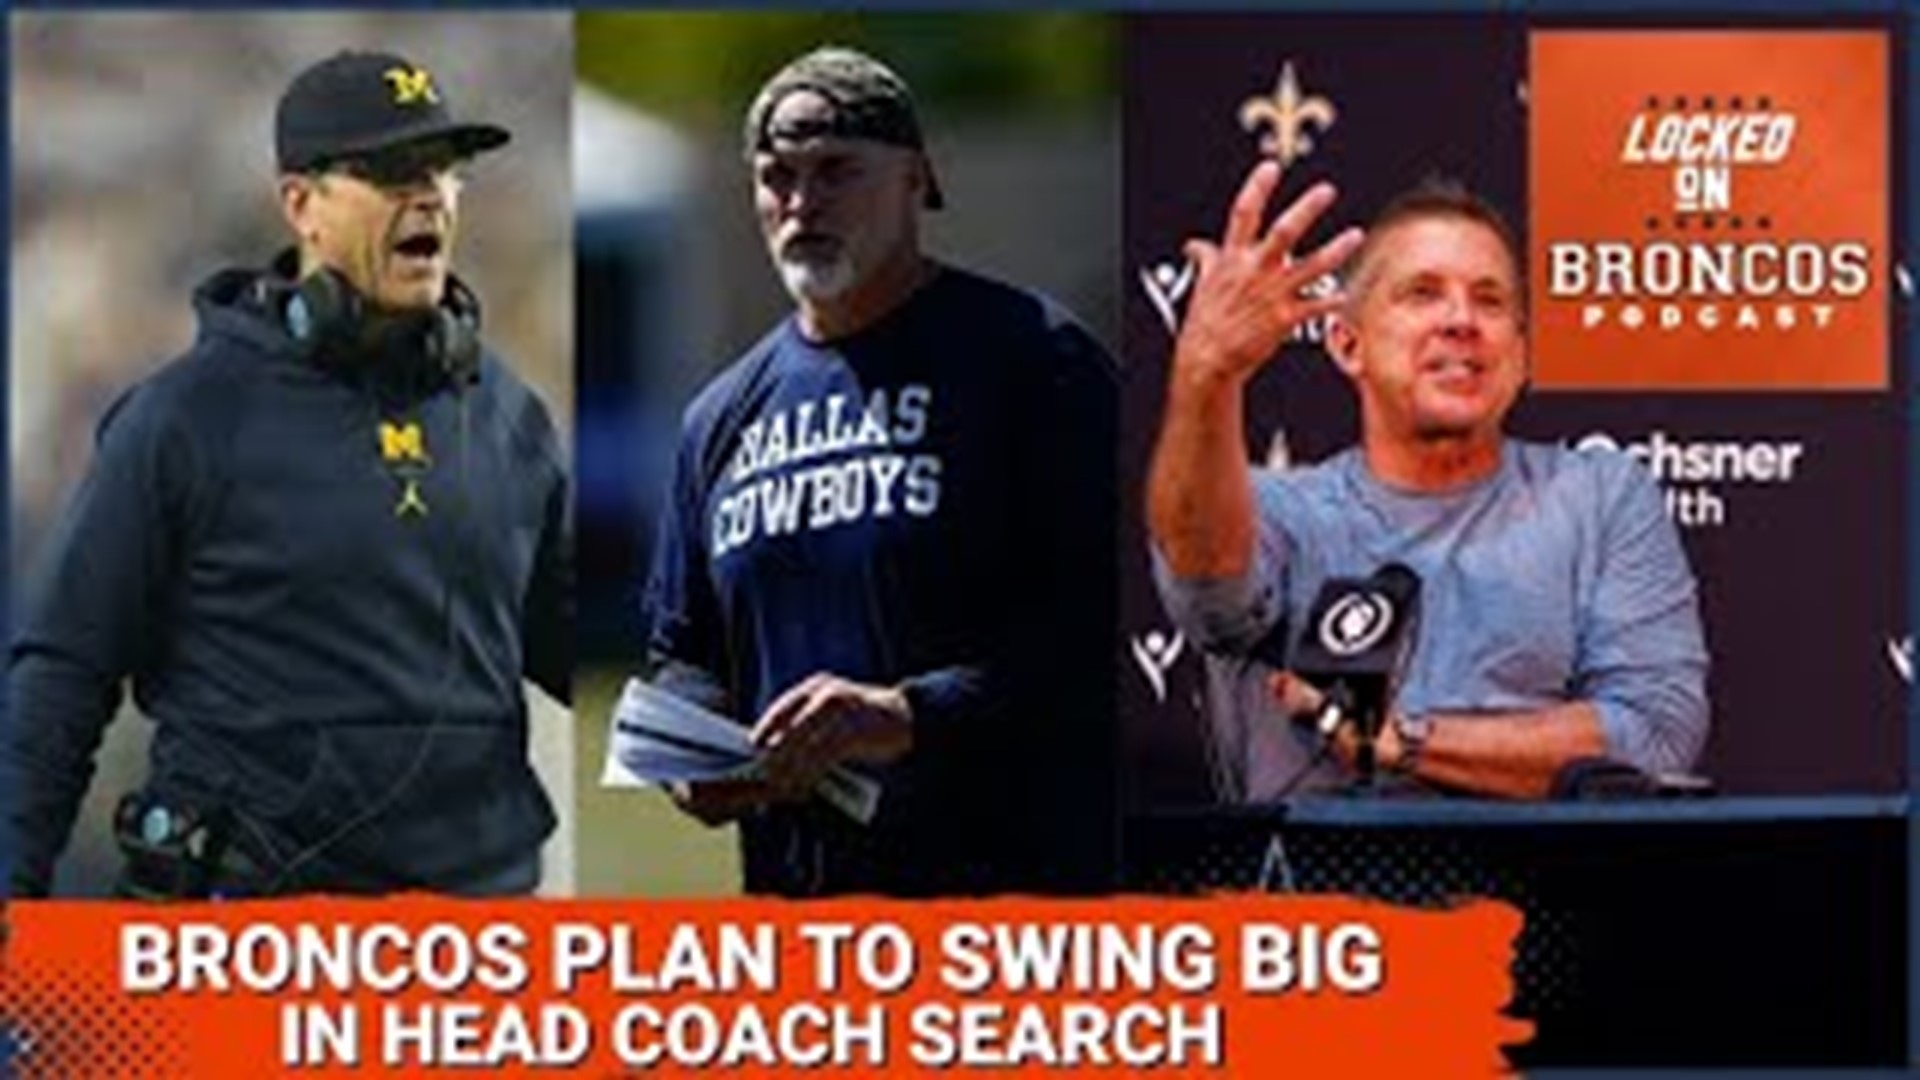 The Broncos are reportedly planning on swinging big in the head coaching search, targeting Jim Harbaugh, Sean Payton, and Dan Quinn as some of their top candidates.